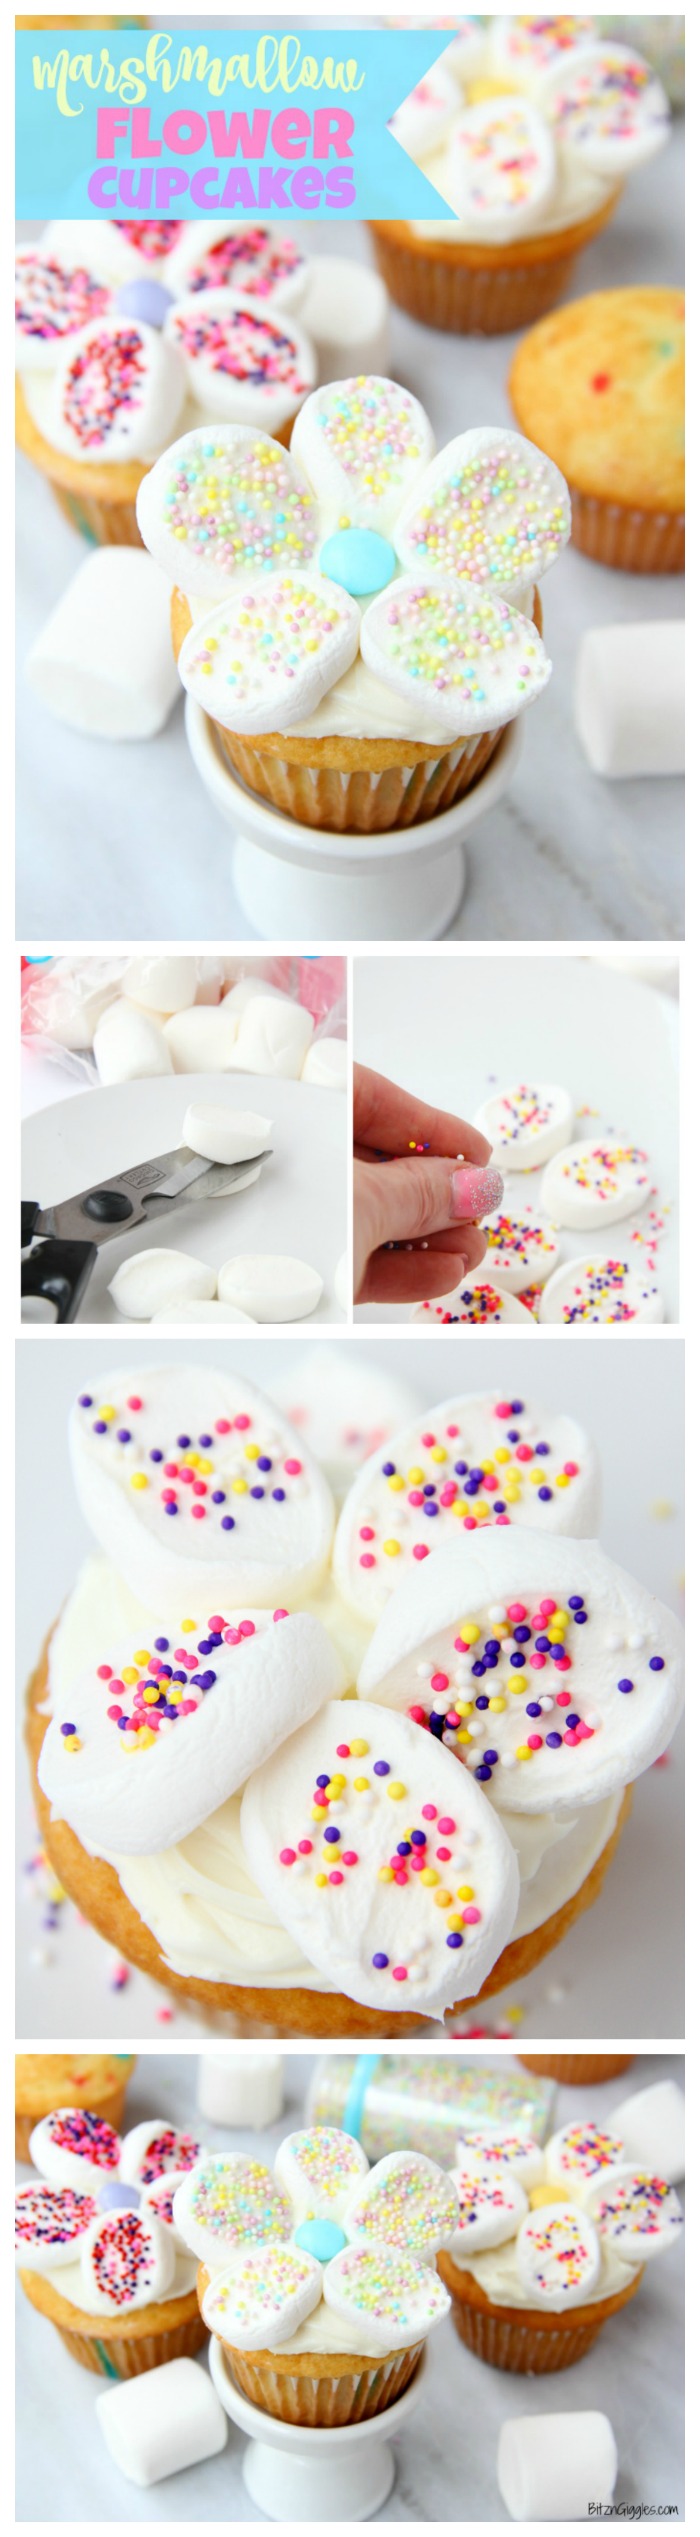 Marshmallow Flower Cupcakes - Funfetti cupcakes with sprinkled marshmallow flowers perfect for spring!